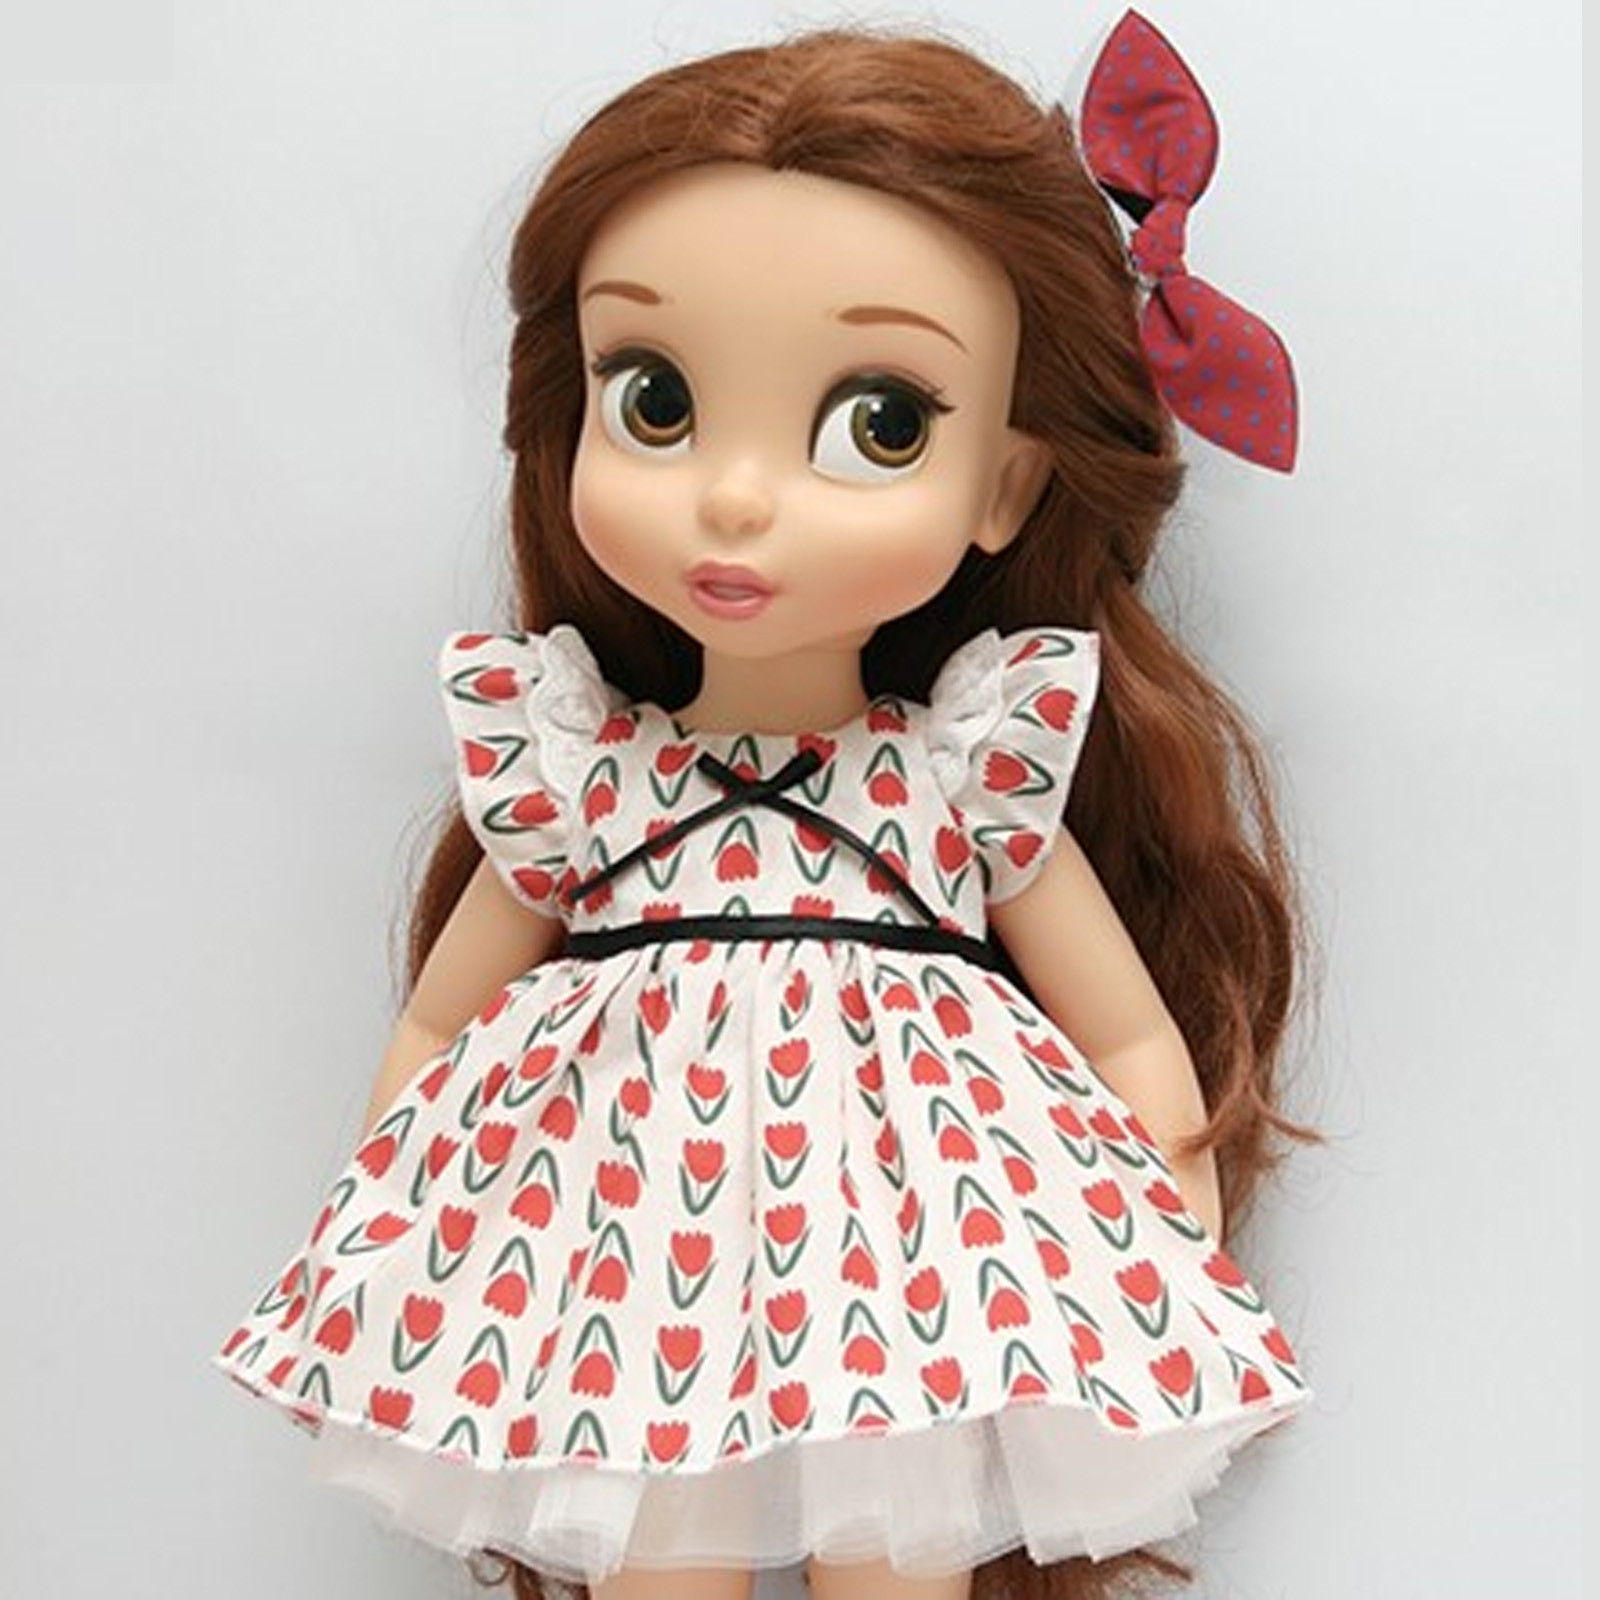 Baby Doll Fashion
 Disney Baby doll clothes dress clothing red flower